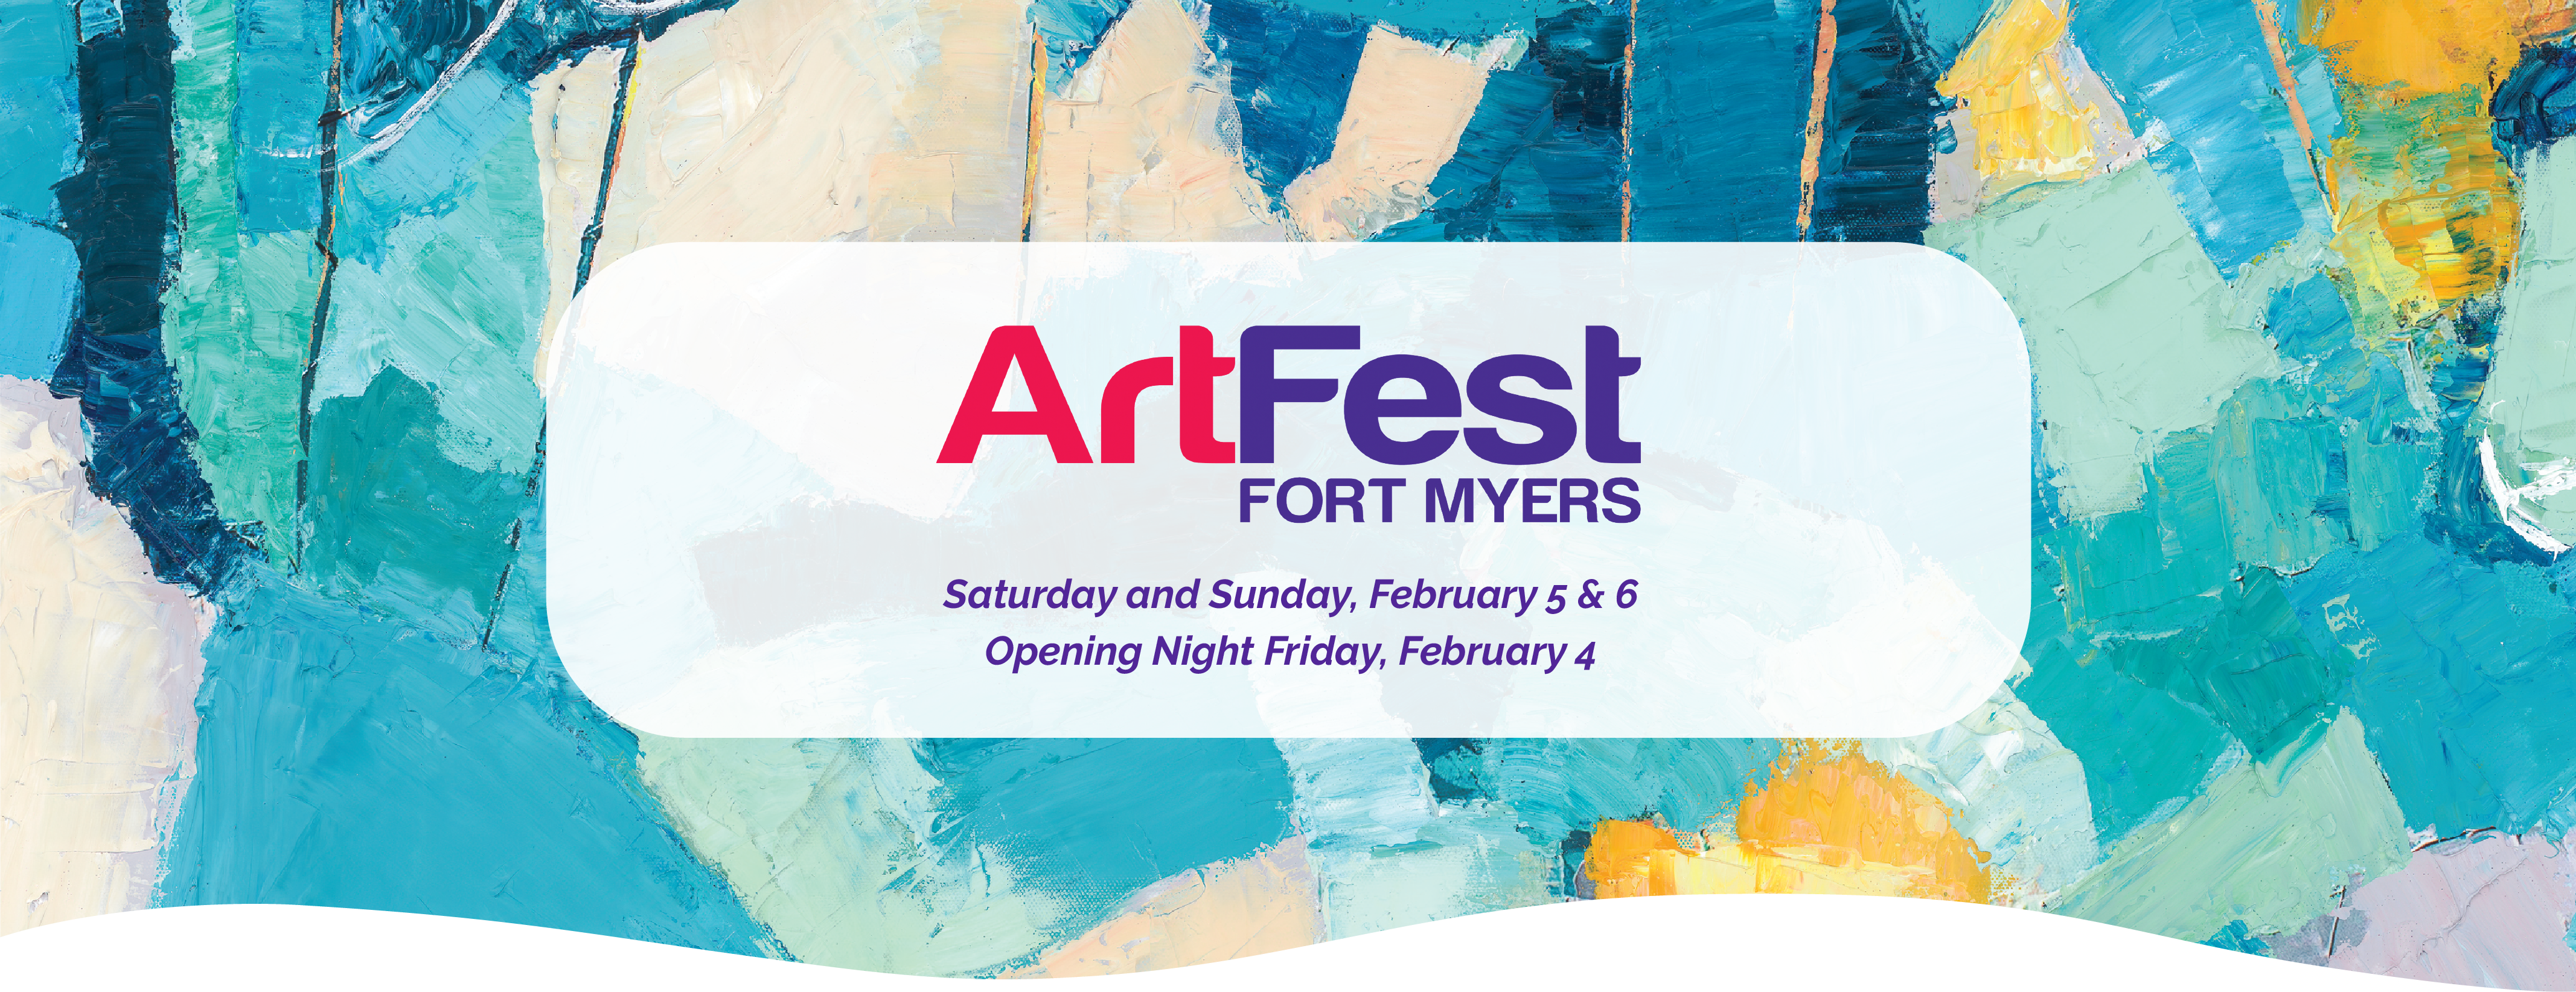 ArtFest 2022 Saturday and Sunday February 5th & 6th and Opening night Friday February 4th